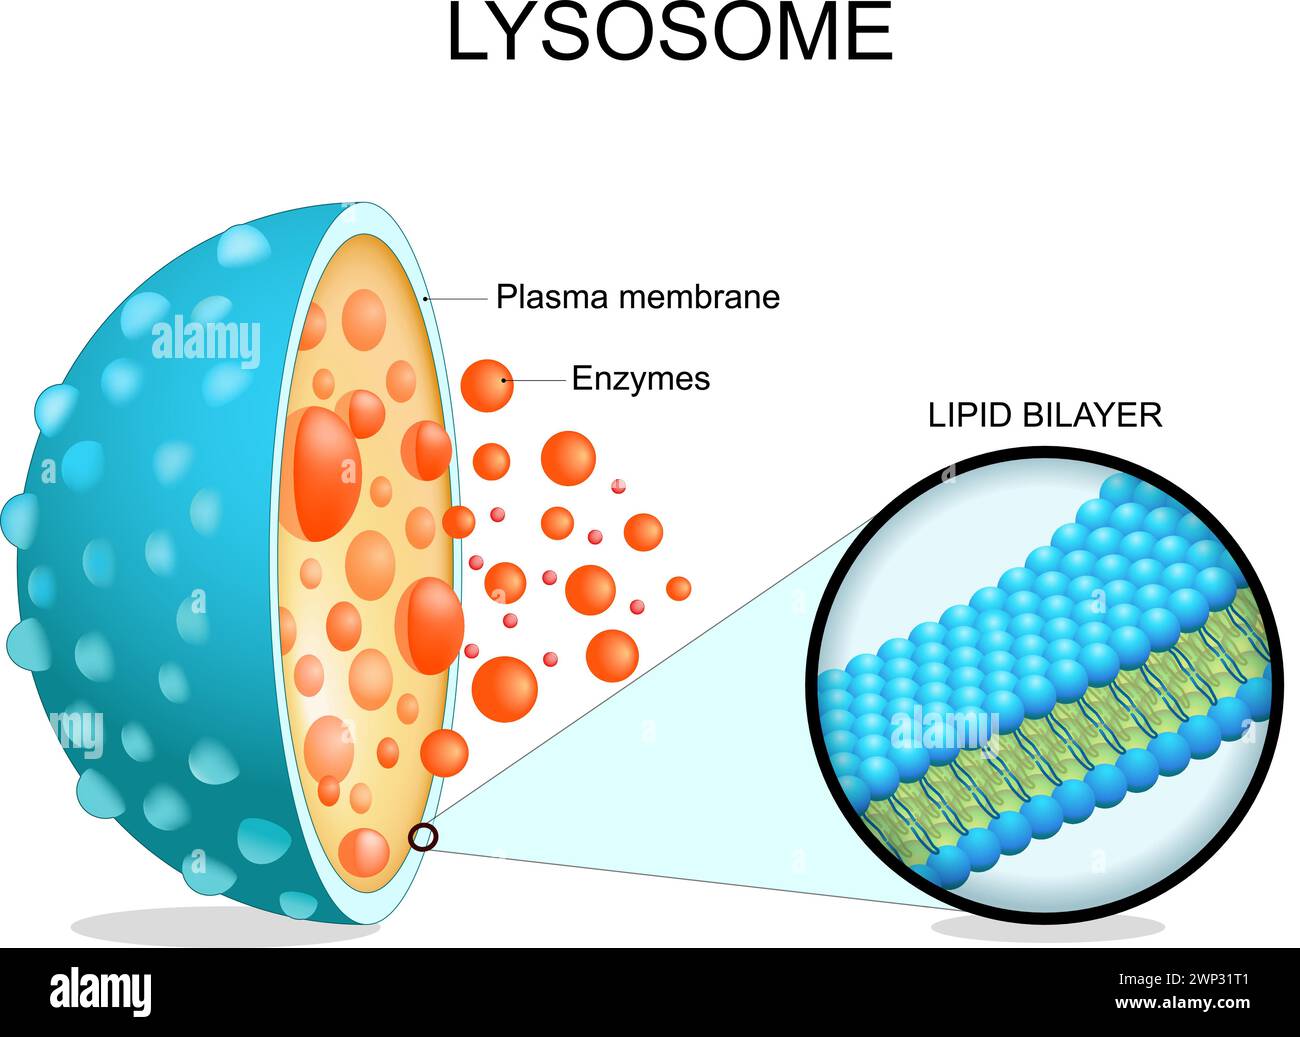 Lysosome anatomy. Cross section of a cell organelle. Close-up of a Lipid bilayer membrane, hydrolytic enzymes, transport proteins. Autophagy. Vector i Stock Vector